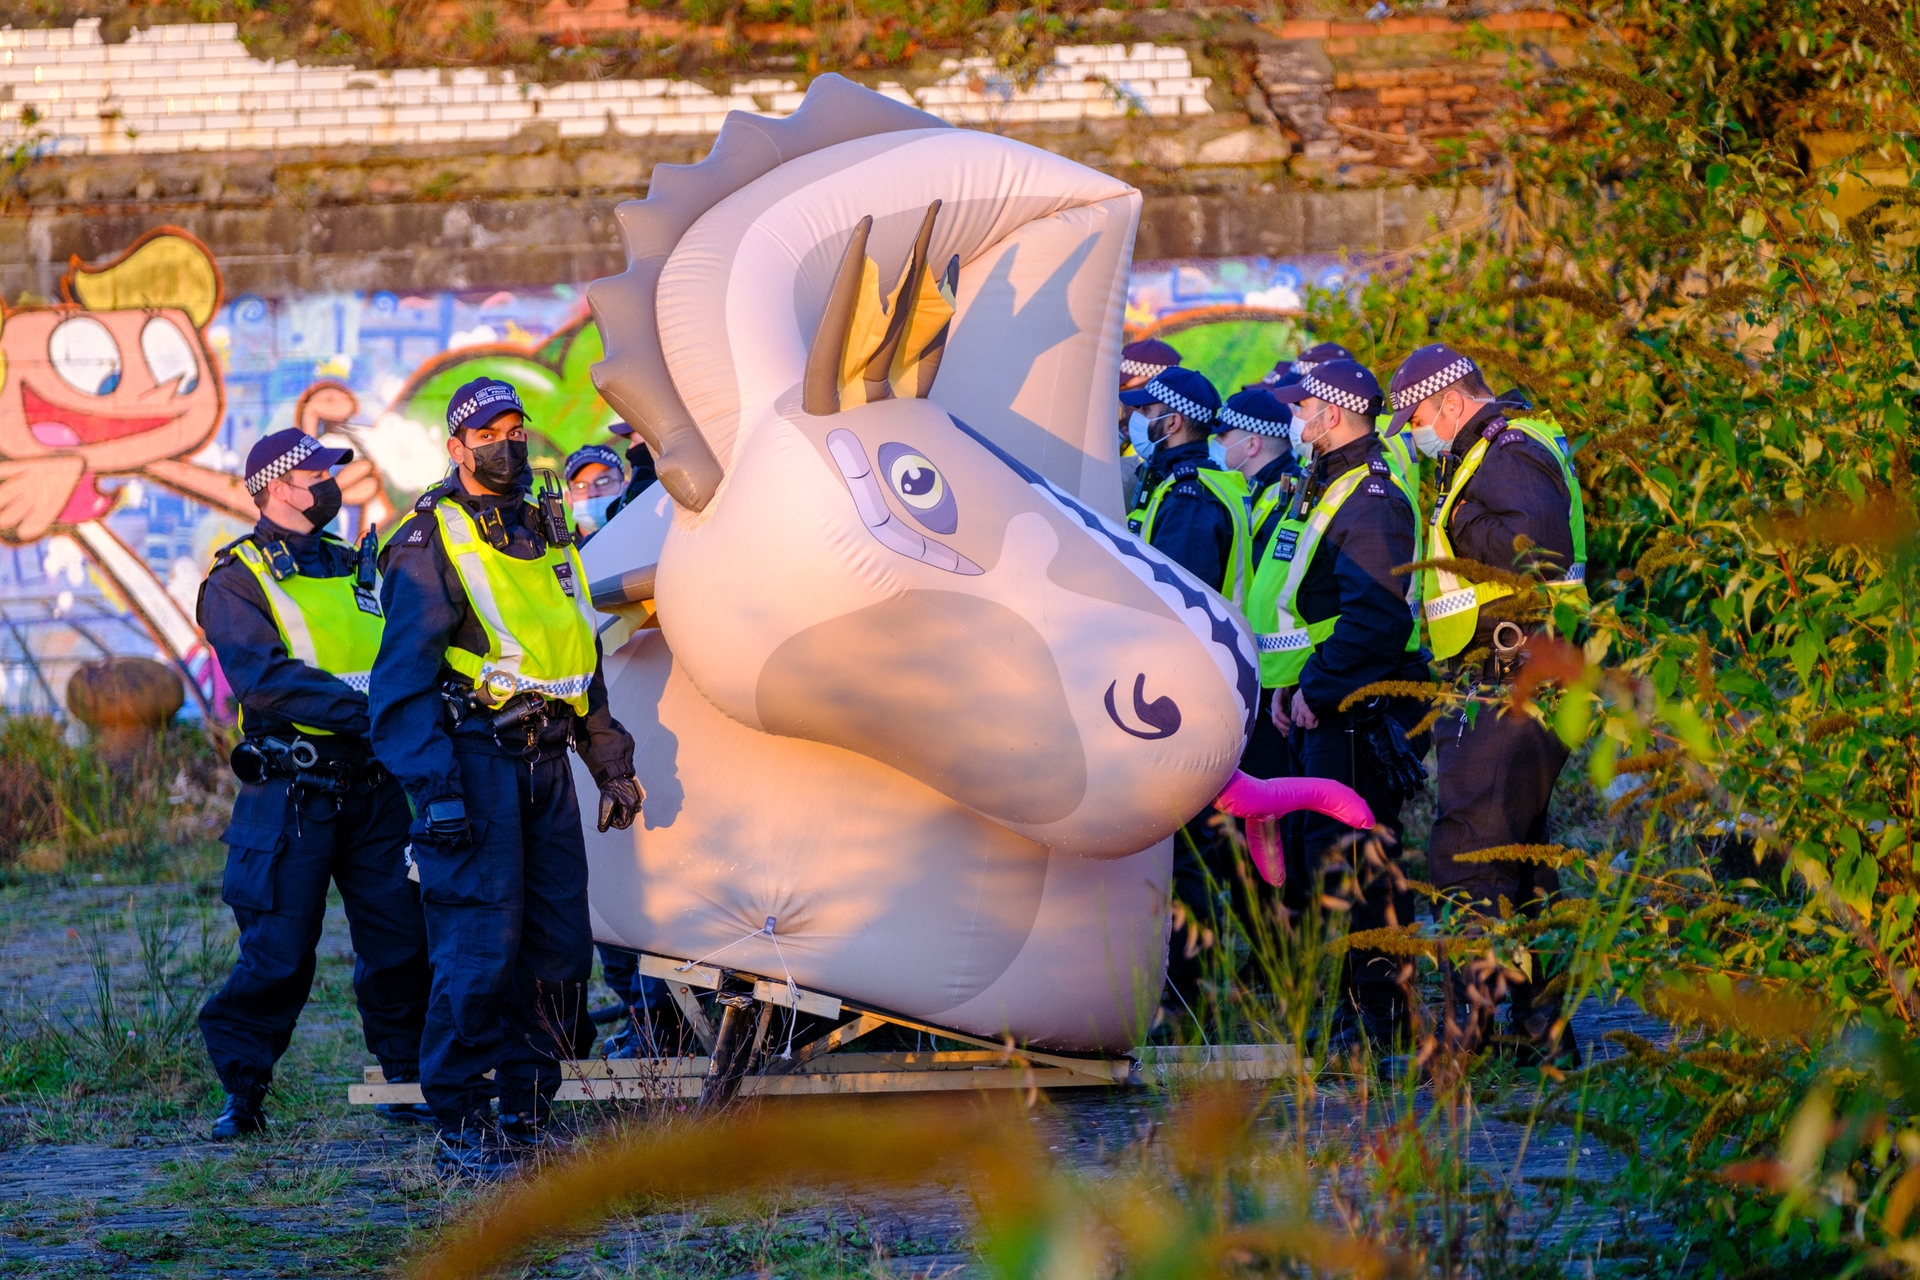 Jubilee Debt Campaign's Loch Ness Debt Monster is impounded by police.